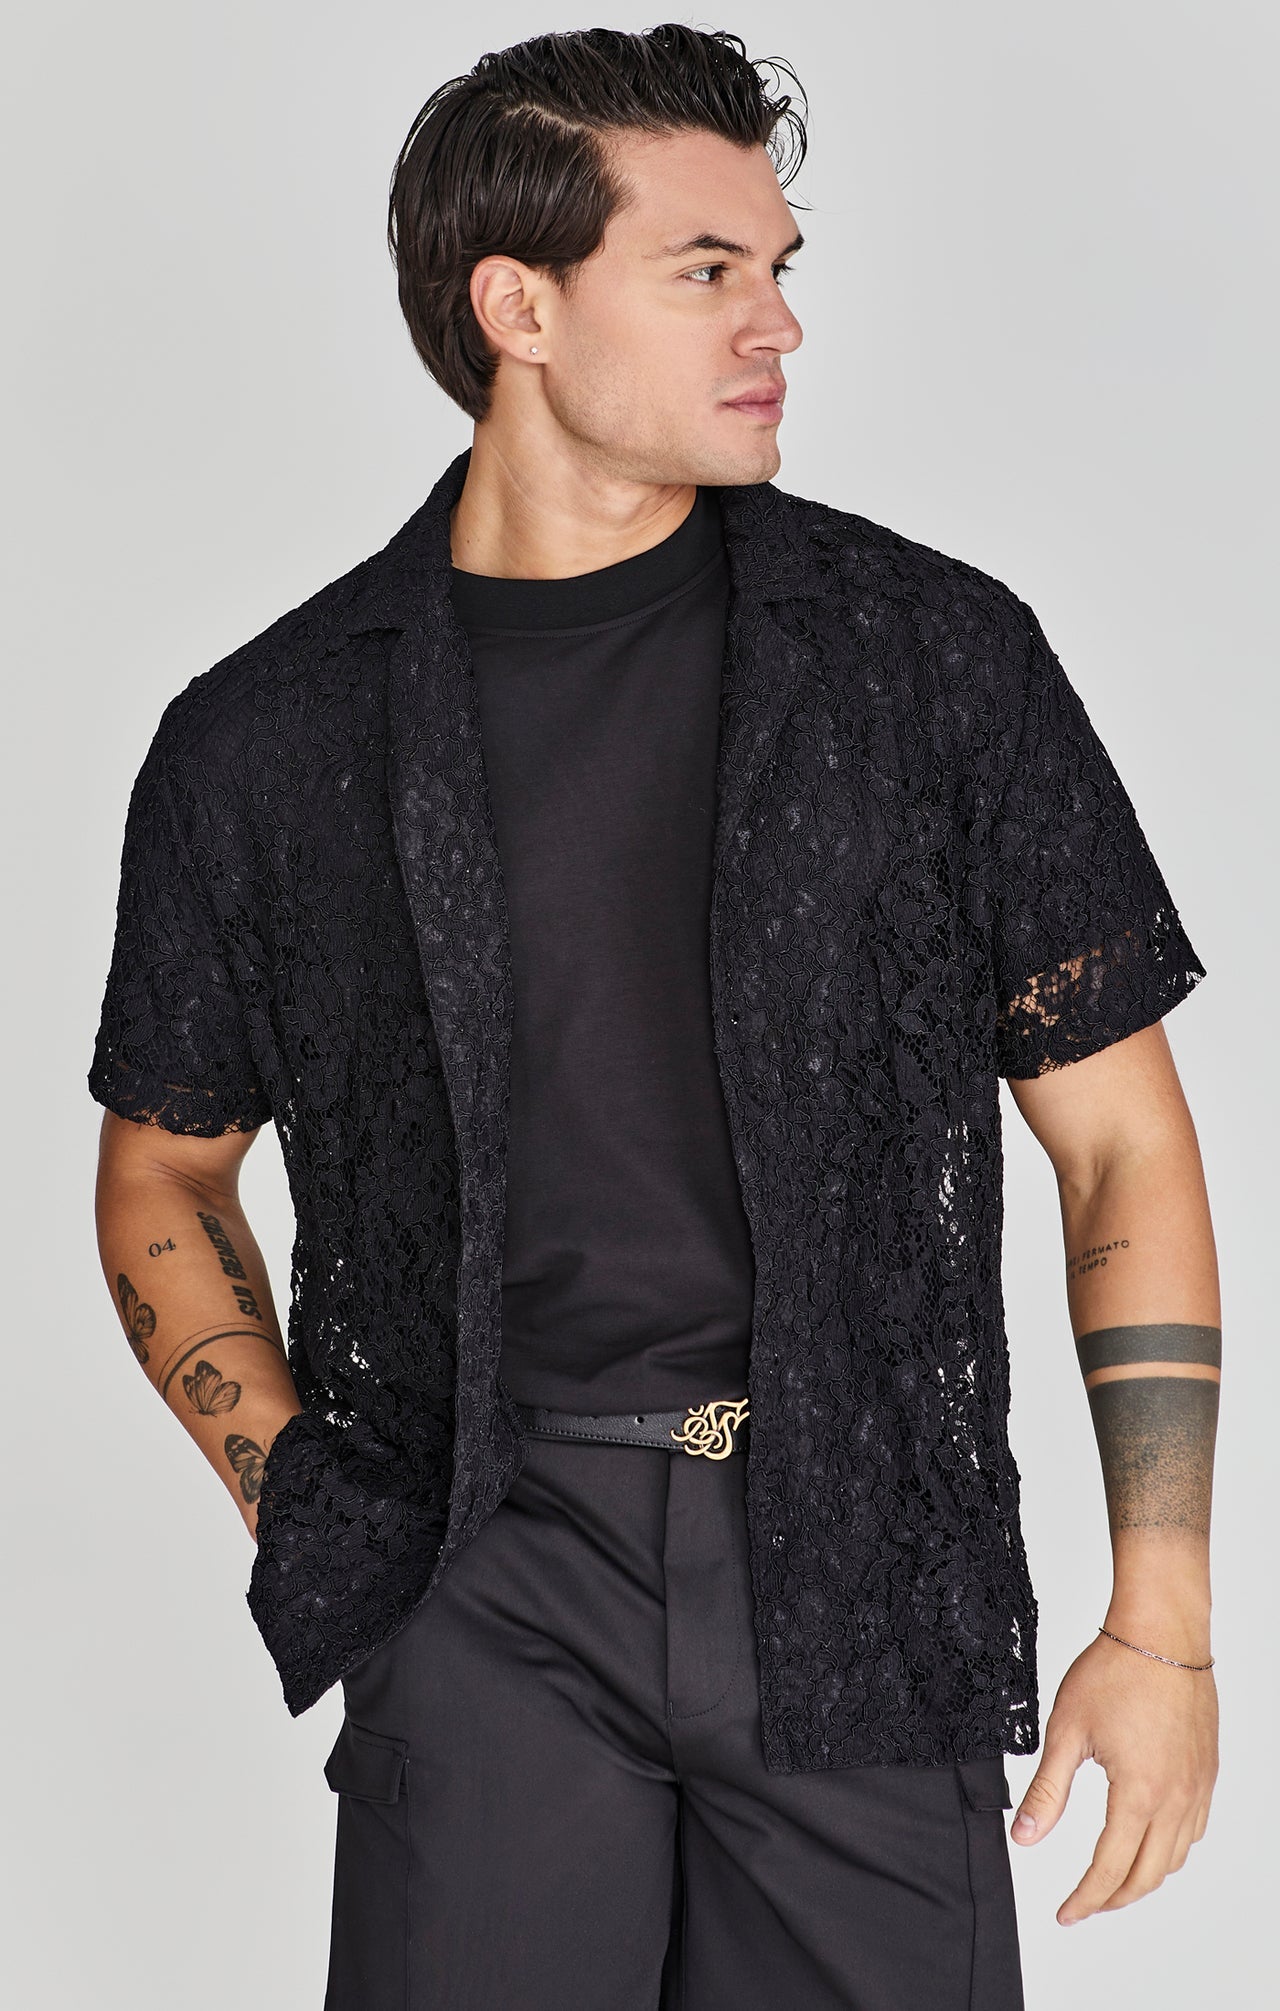 Lace Resort Shirt in Black